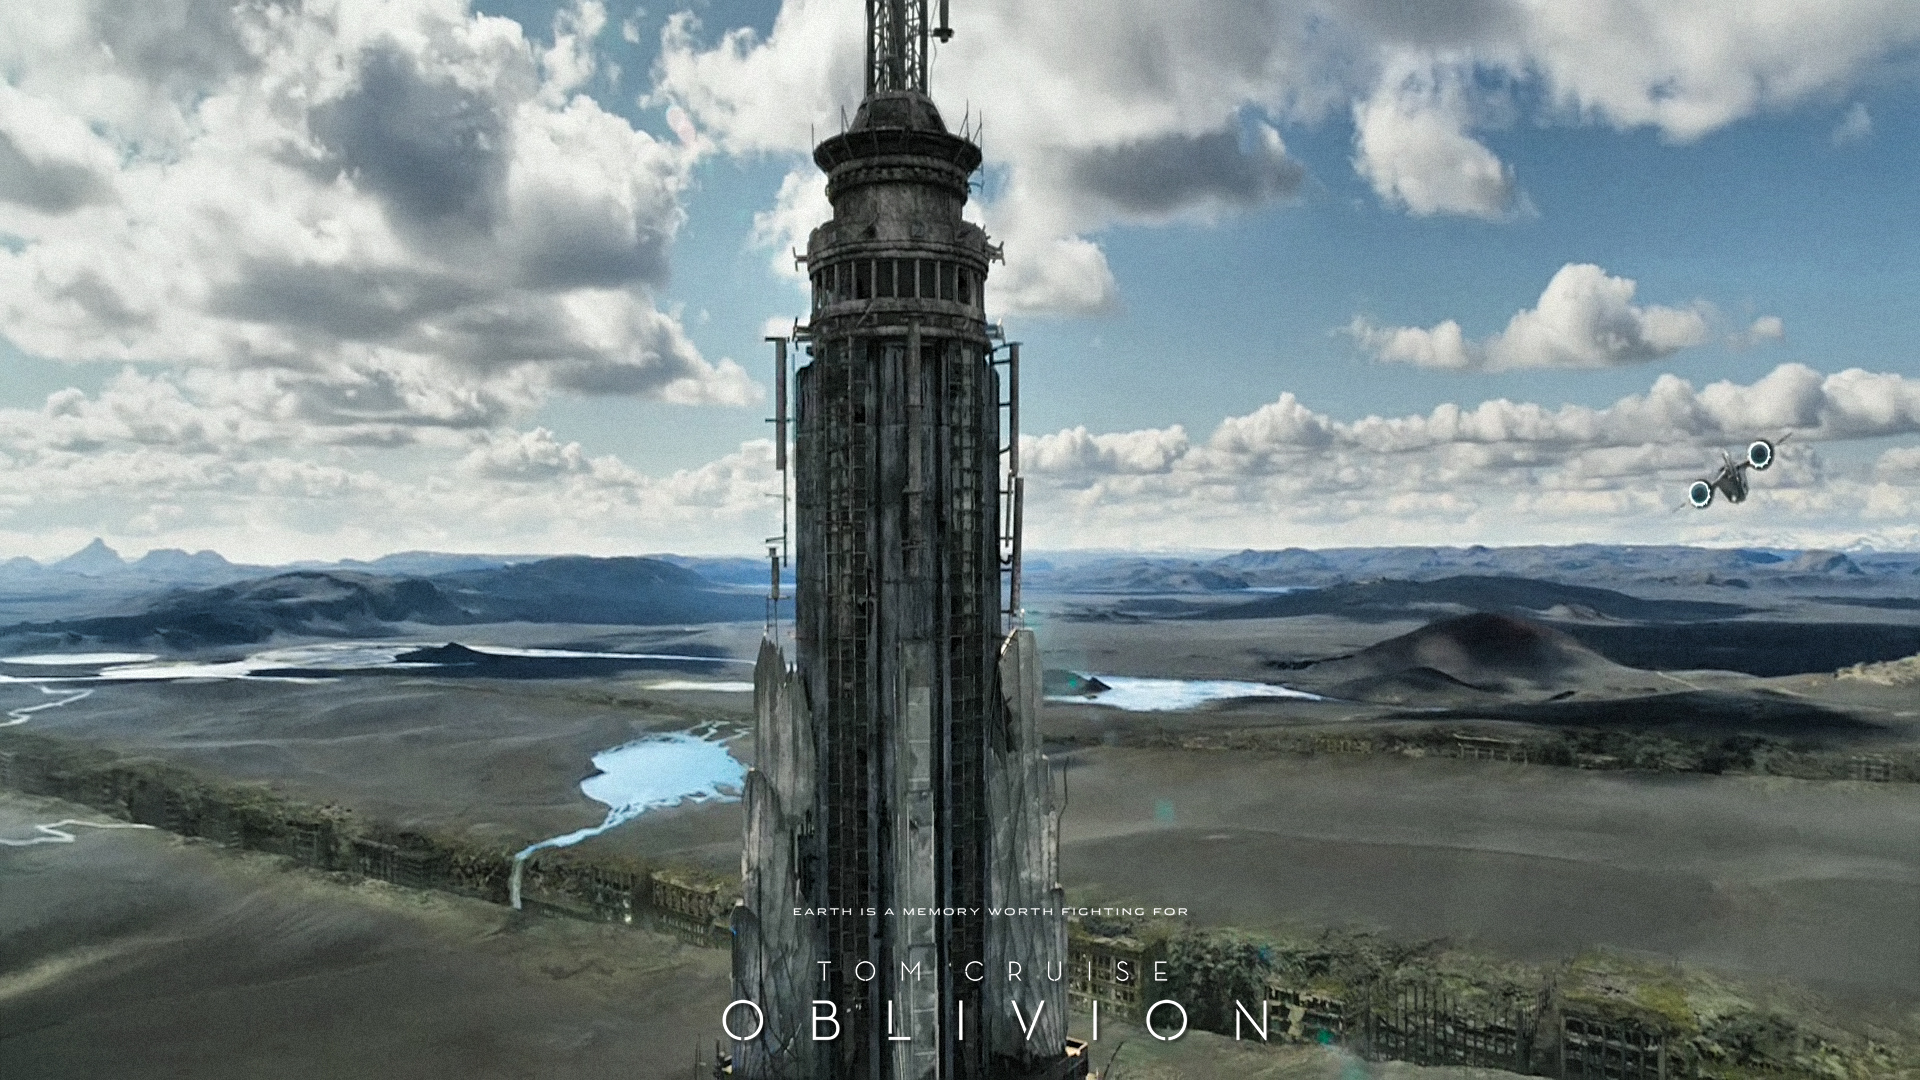 20 HD wallpapersscreenshots of Oblivion with Tom Cruise Movie